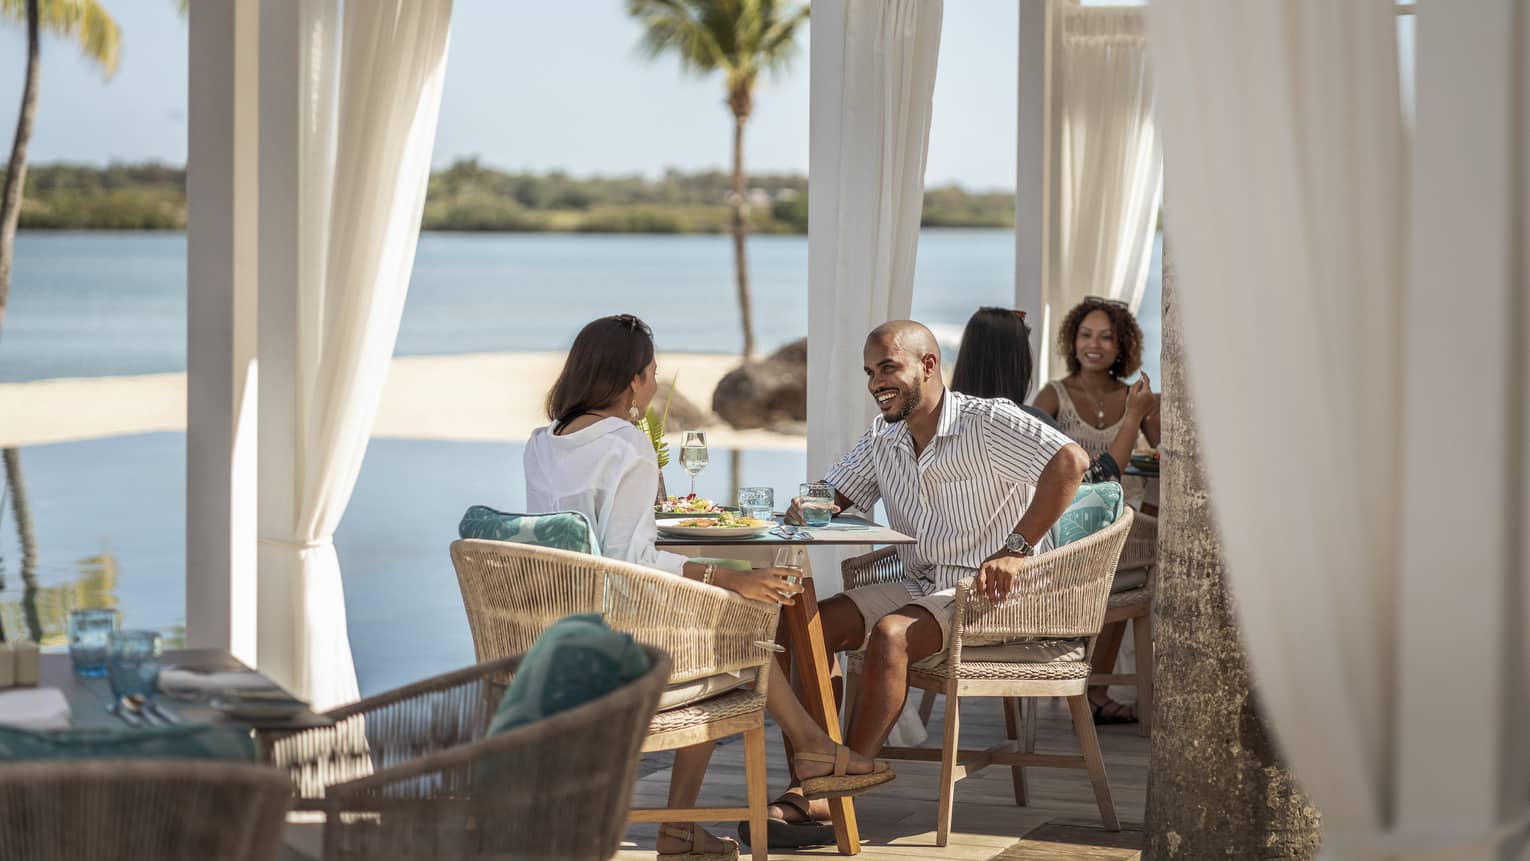 Couple sitting at waterfront restaurant, smiling over food and drinks 